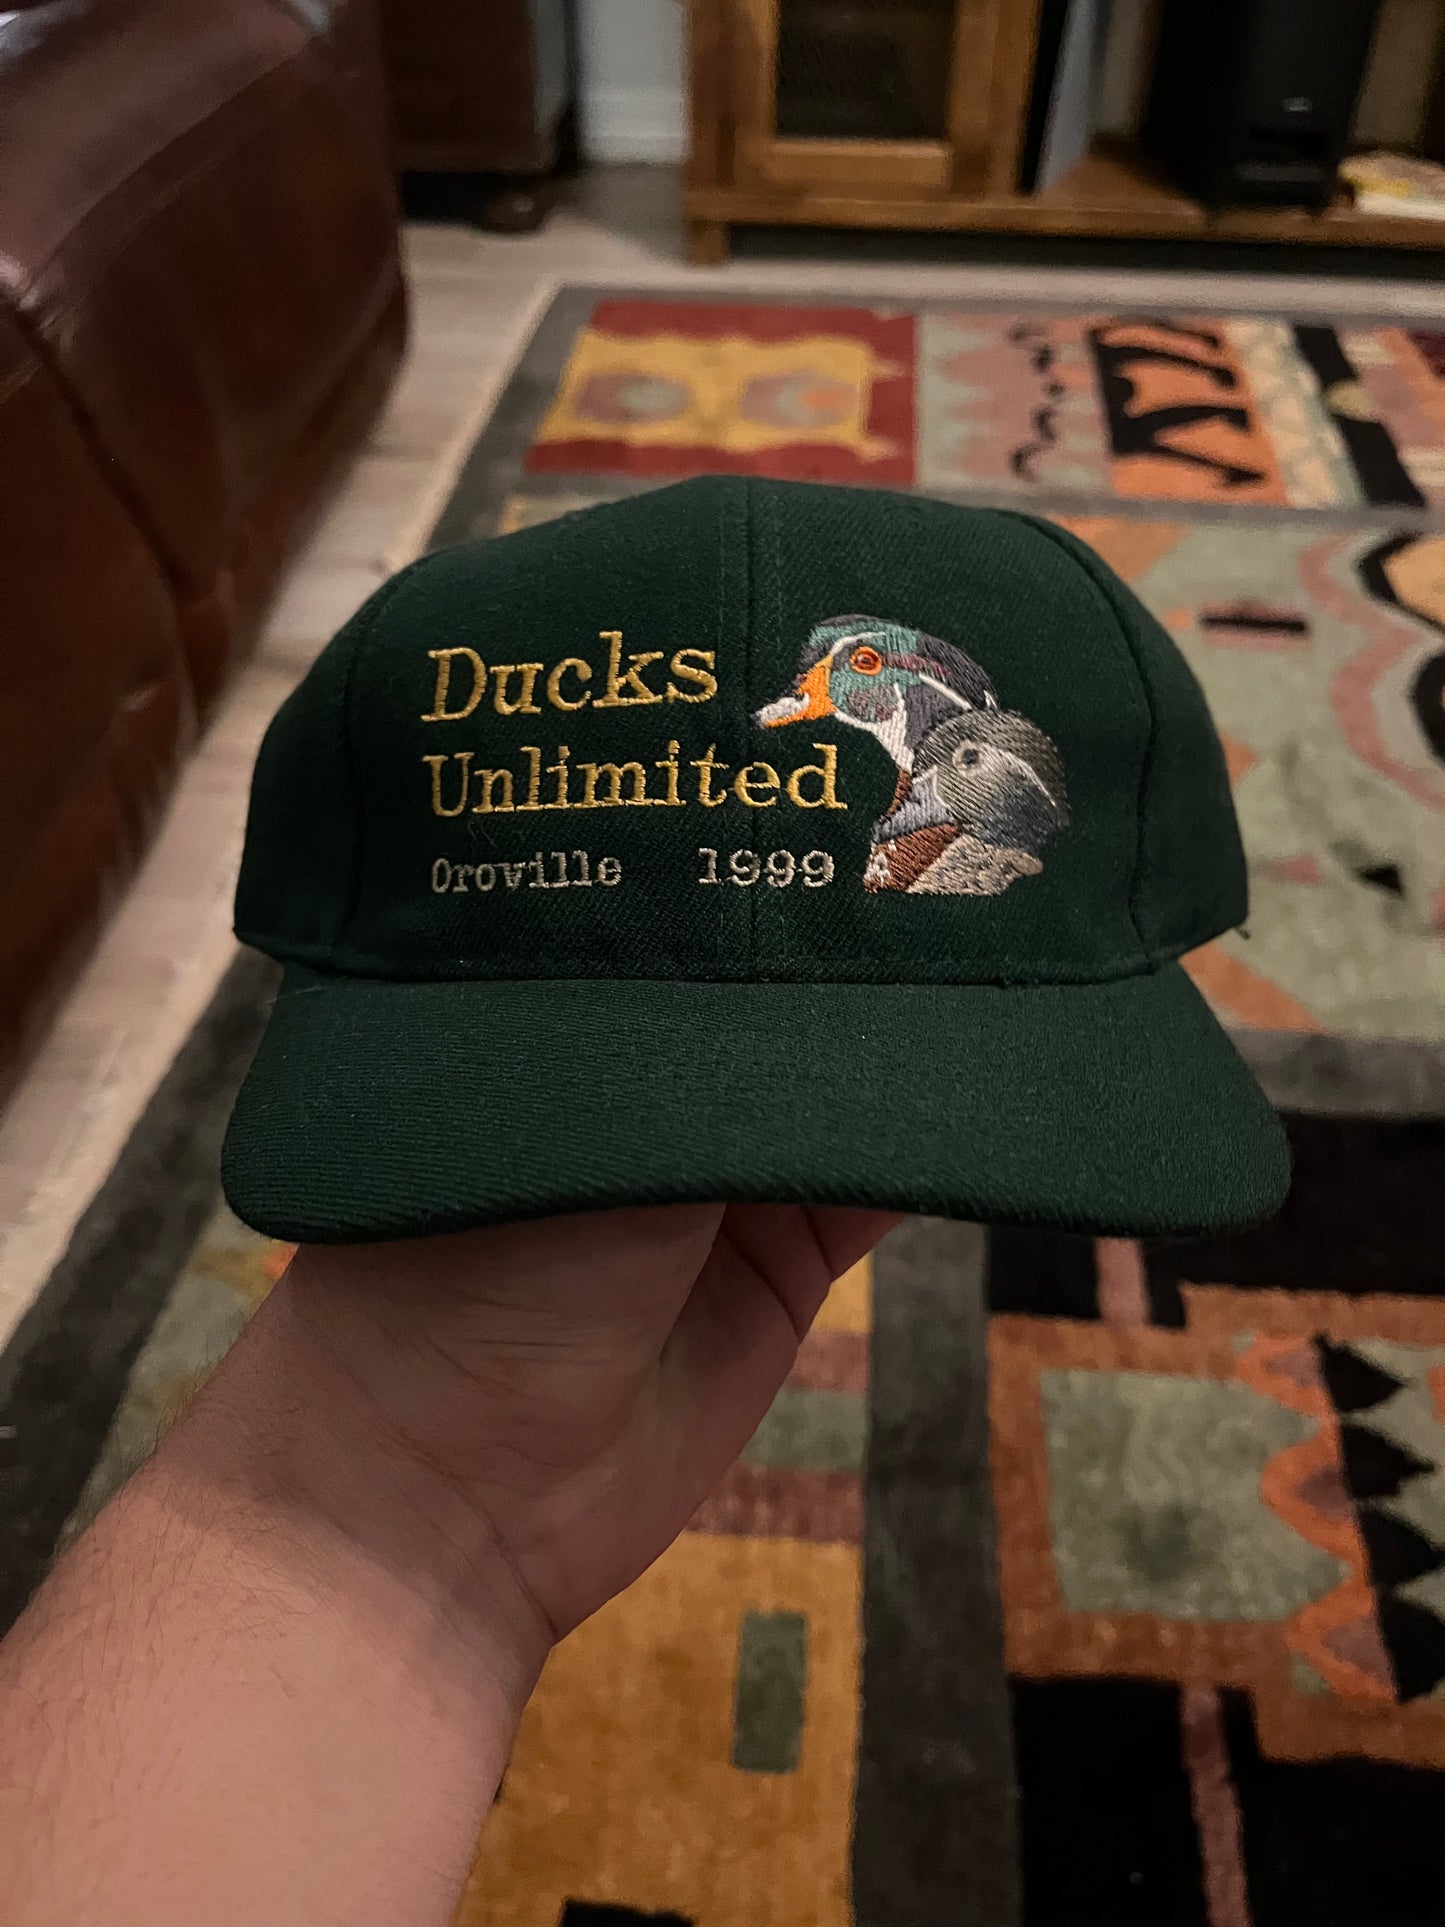 1999 Ducks Unlimited Oroville Woodies